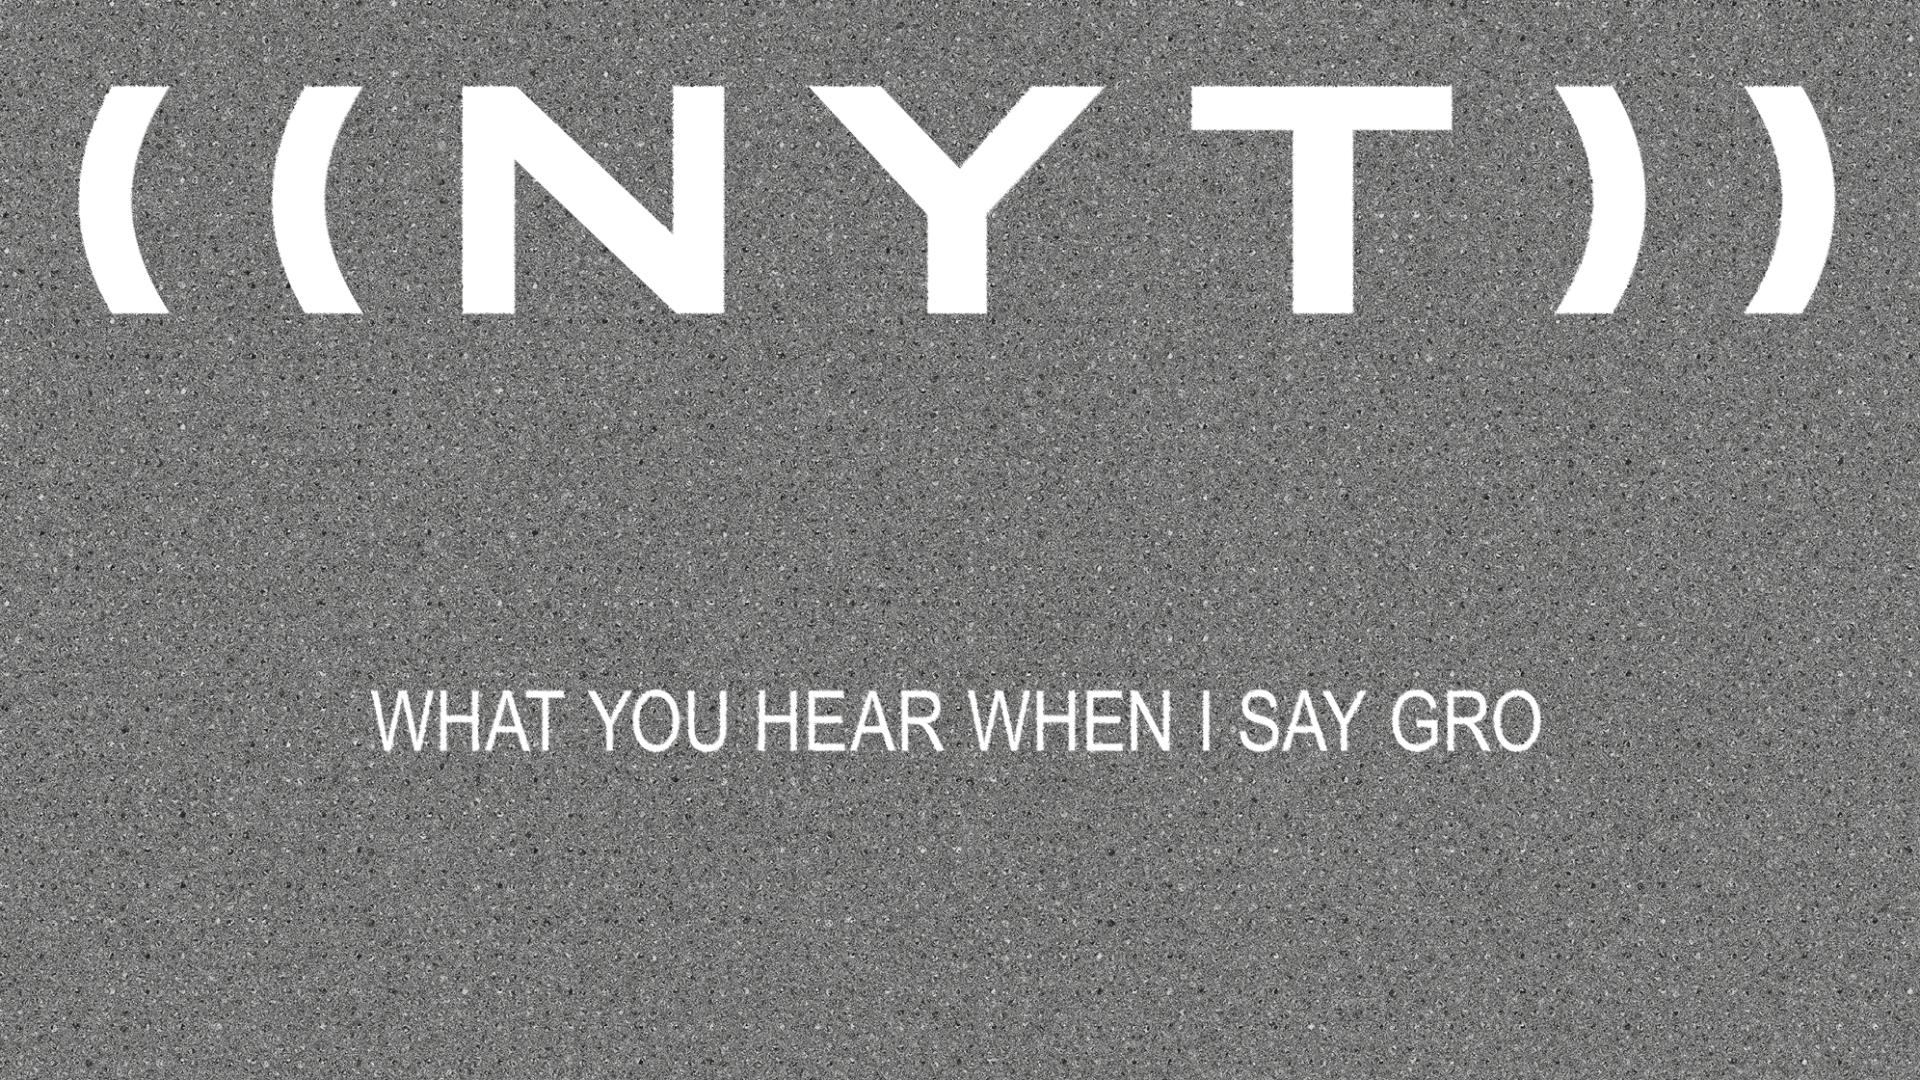 The sentence &quot;What you hear when I say gro&quot; is written on a gray background that is reminiscent of the noise image on the television.